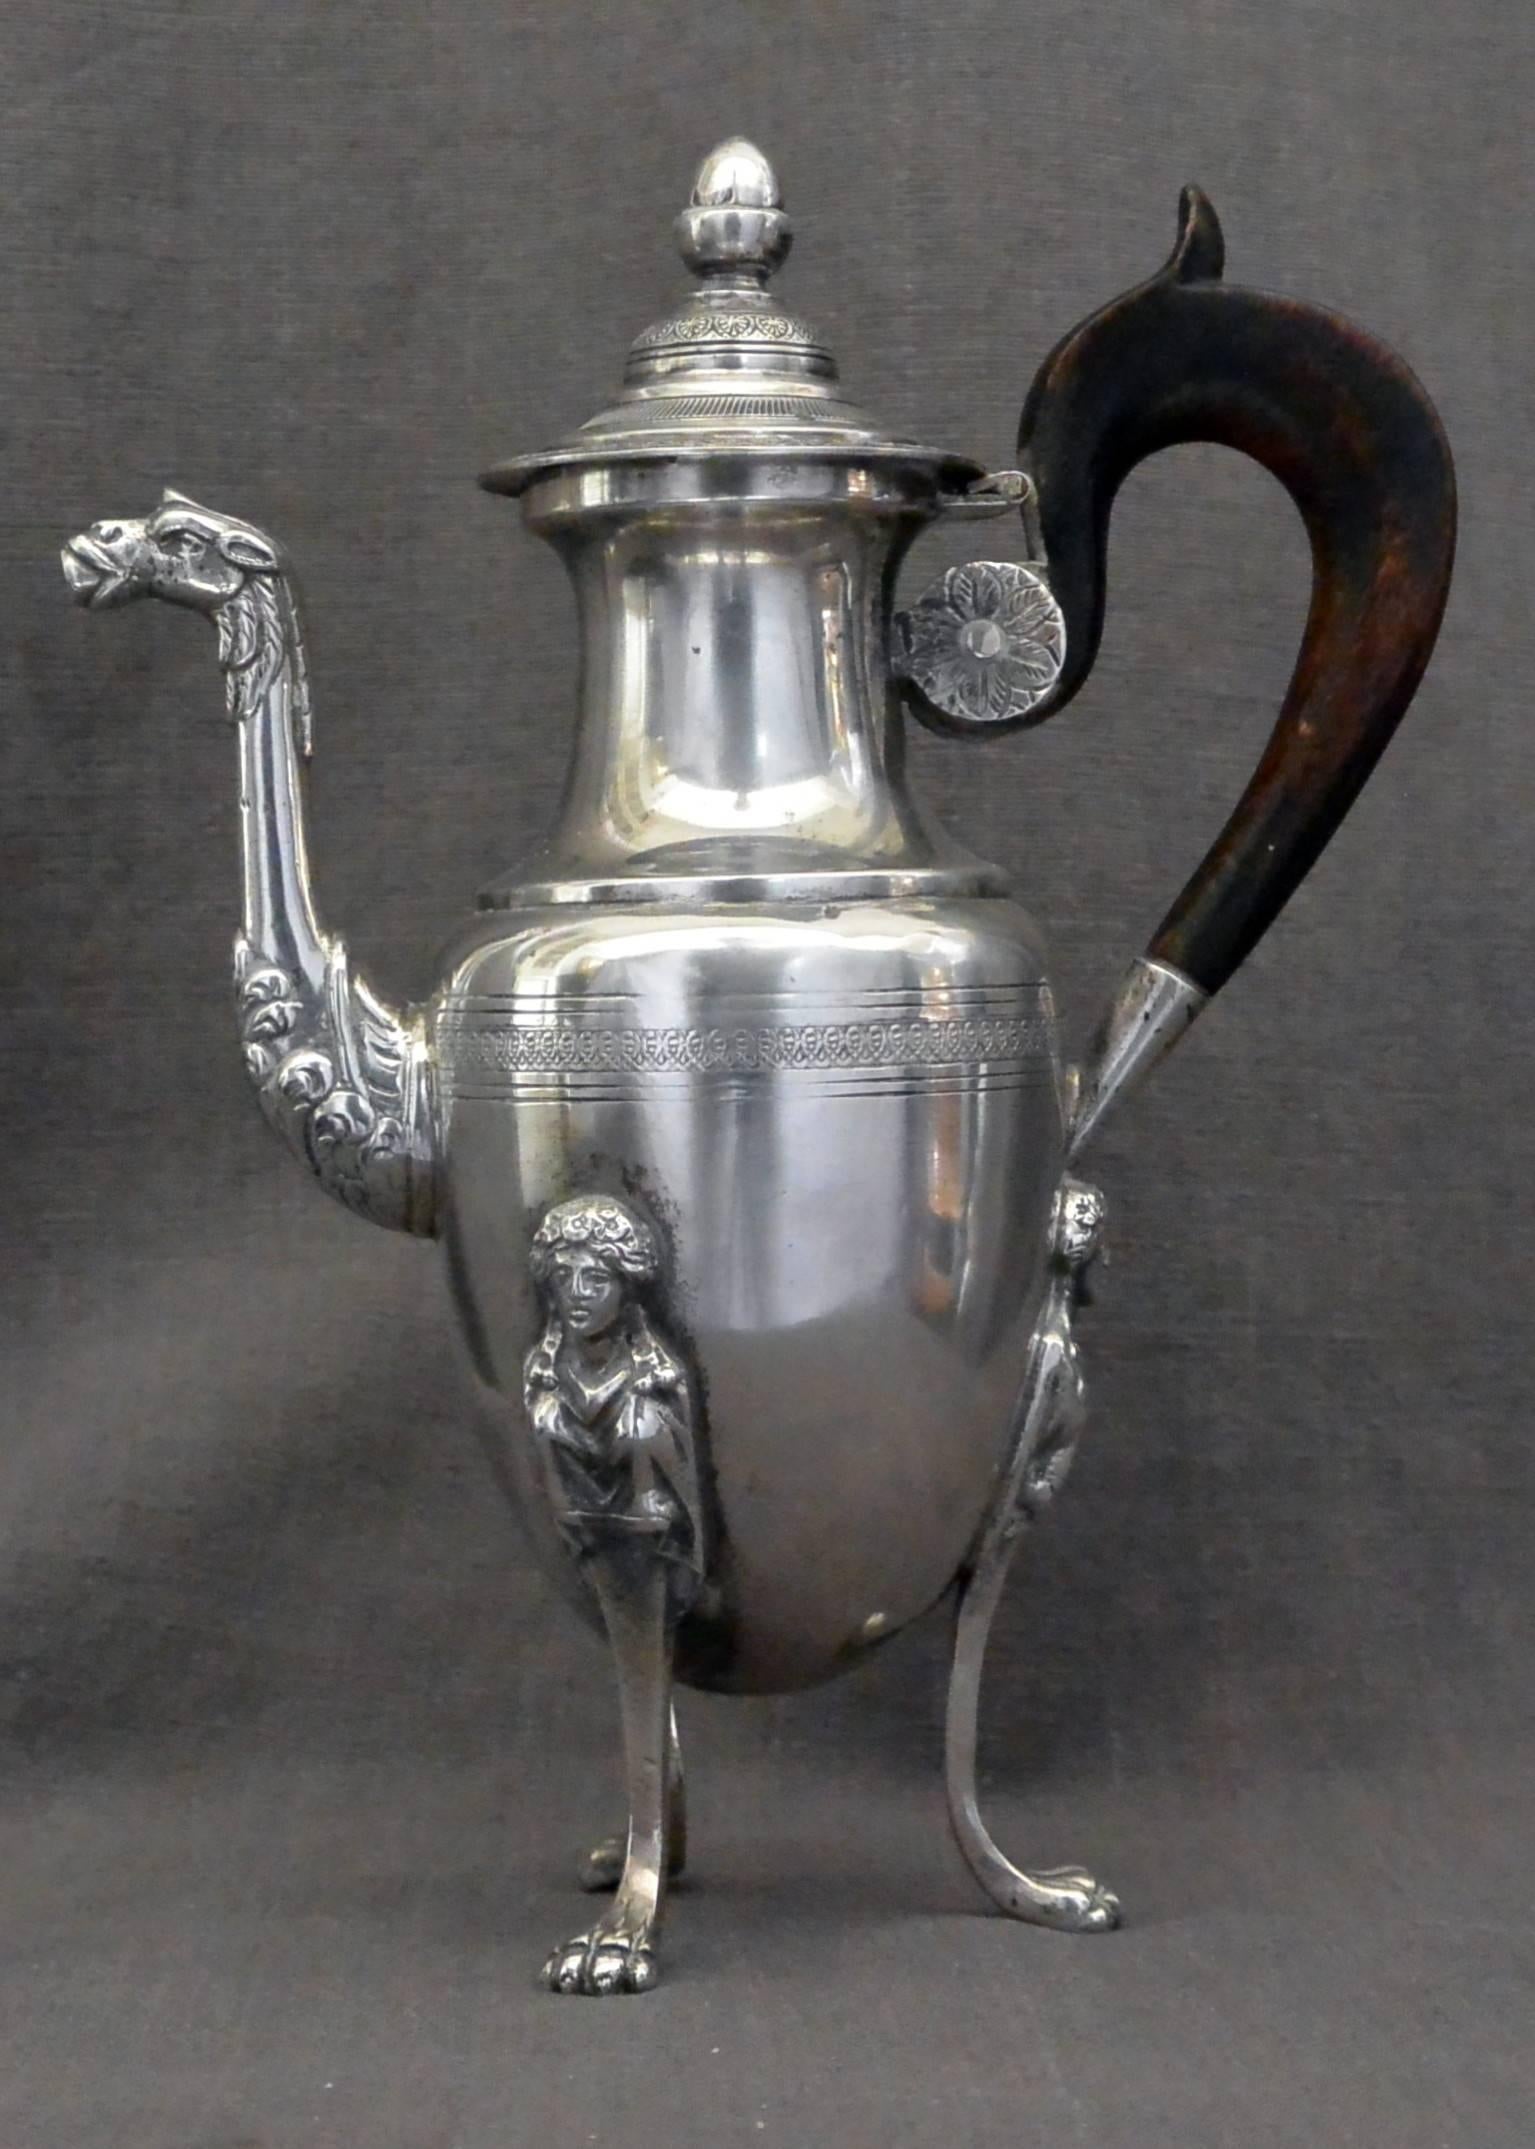 Italian Neoclassical silver coffee pot and sugar bowl.  Italian Neoclassical Silver Coffee Pot and Sugar Bowl. Neapolitan caffettiera in sterling silver with wood handle of neoclassical form and decoration with acorn lid and camel spout of oviform